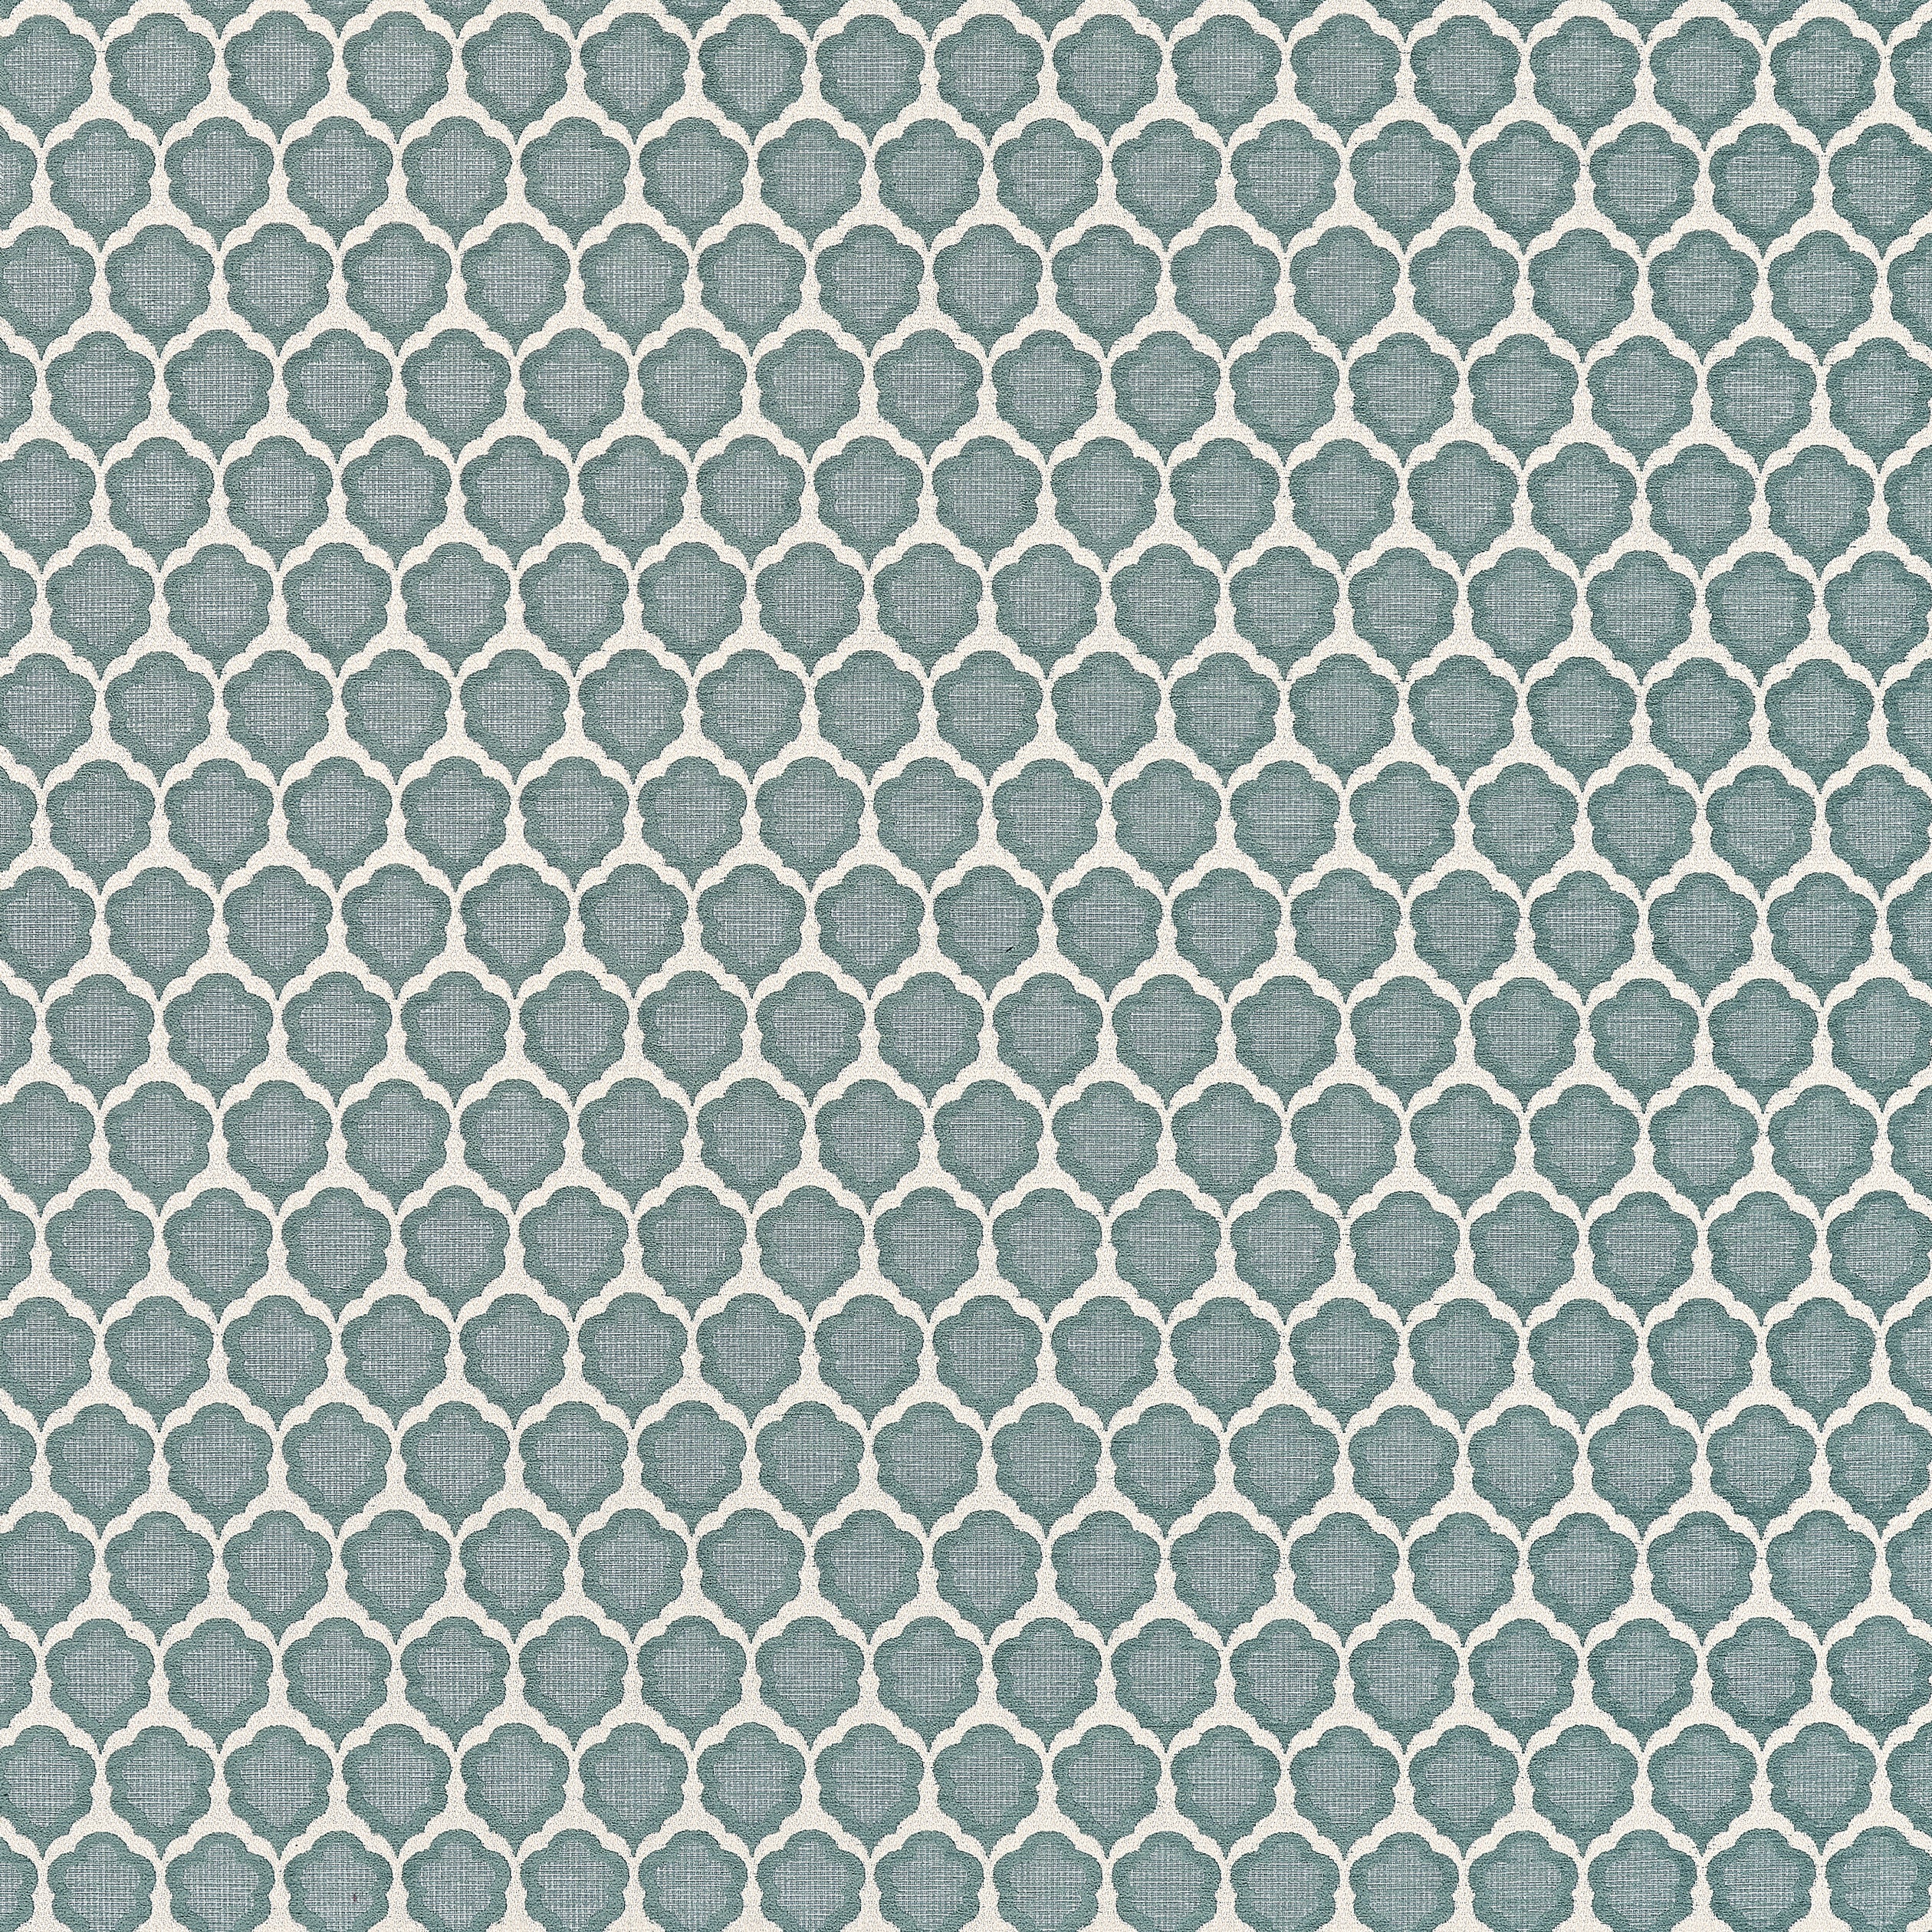 Genie fabric in jade color - pattern number W81931 - by Thibaut in the Companions collection